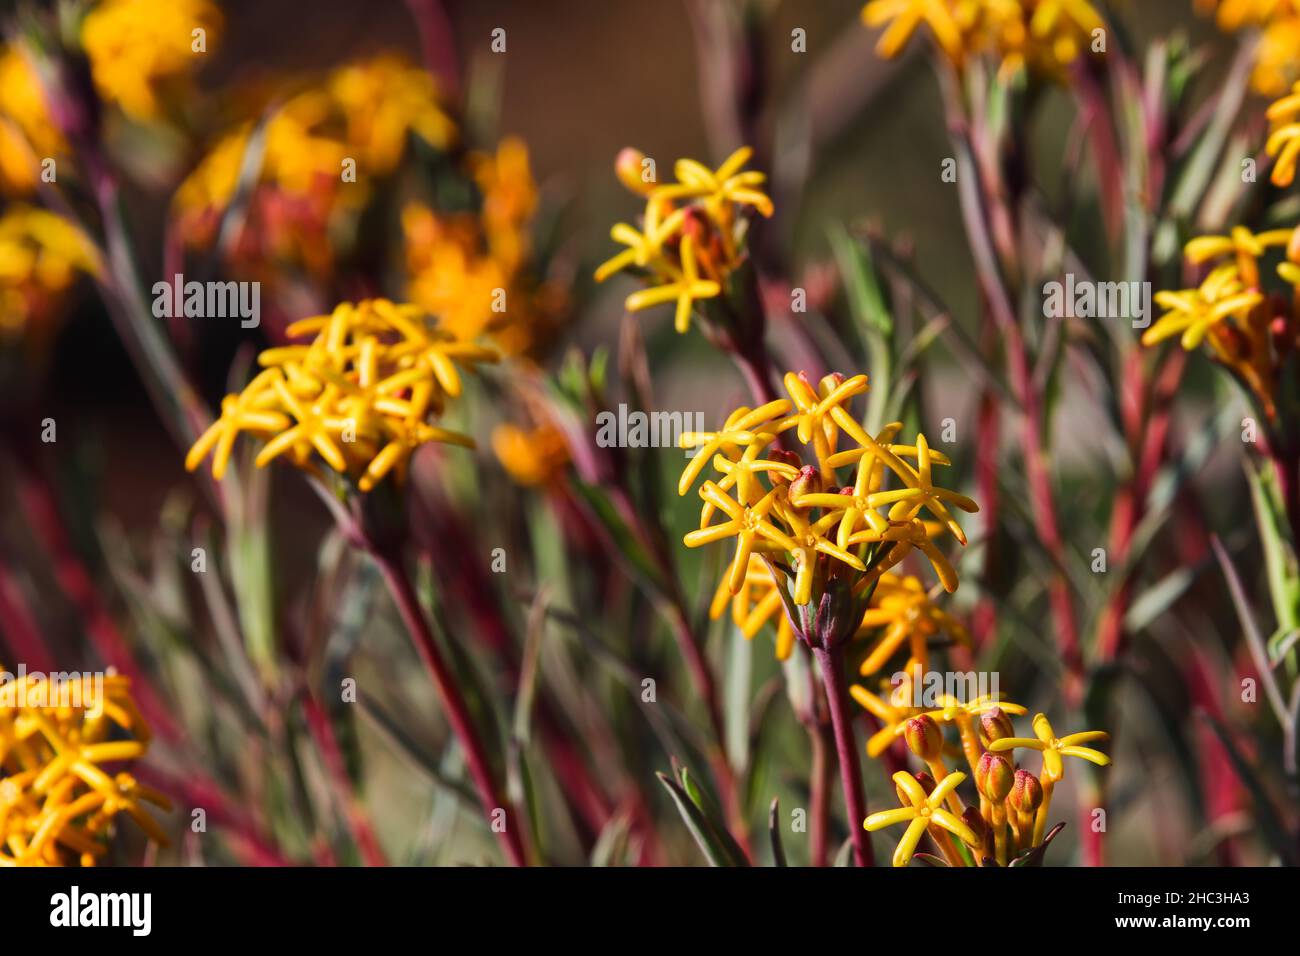 Curry Flower Heads In Bloom (Gnidia capitata) Stock Photo